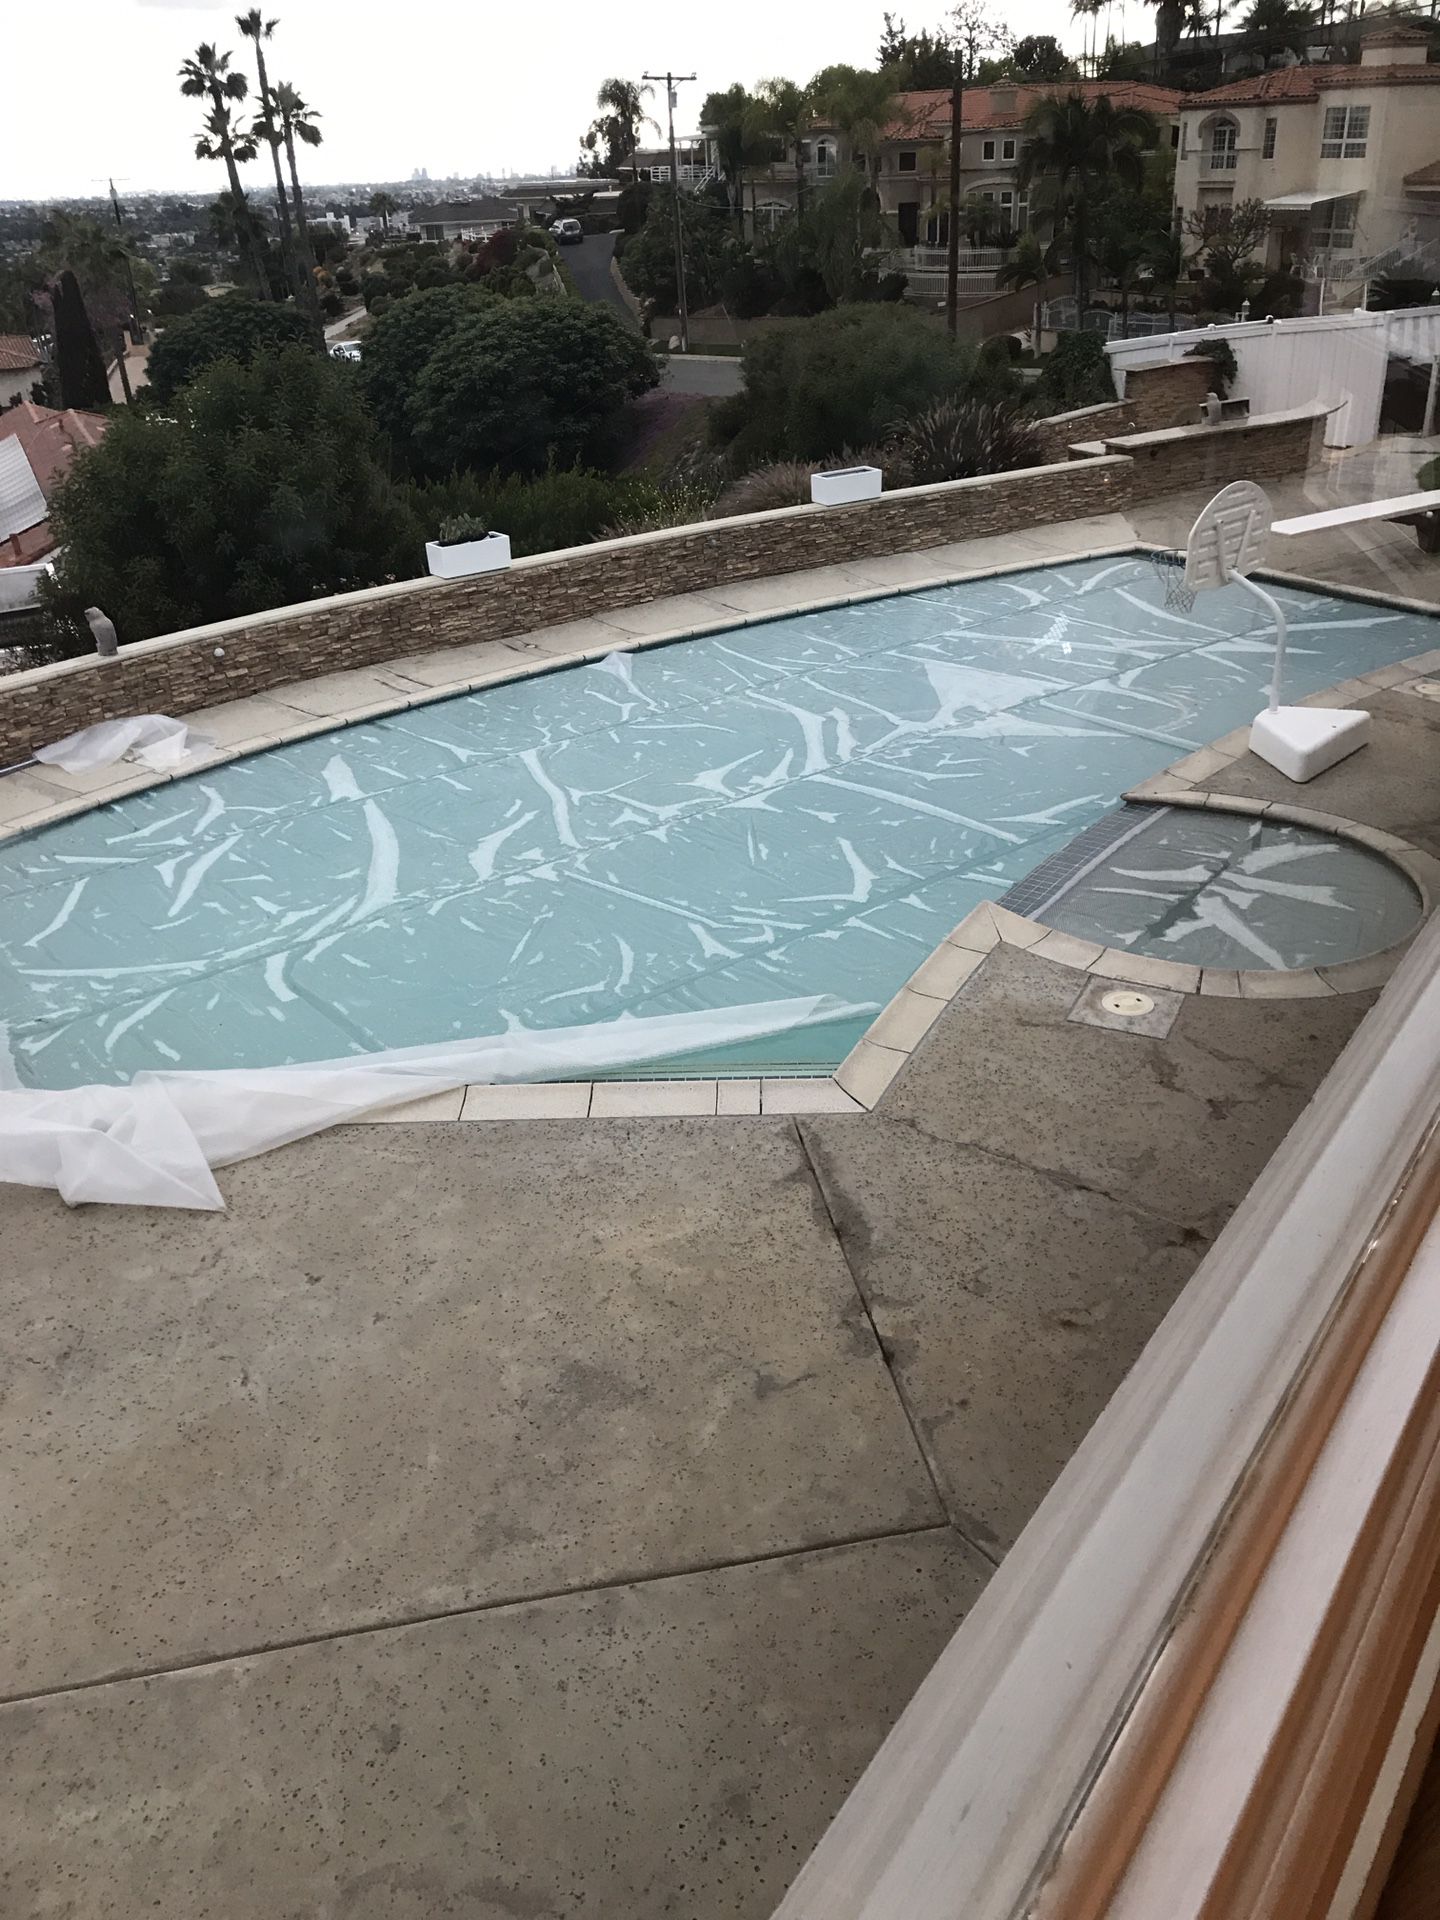 Solar heating pool cover remnants